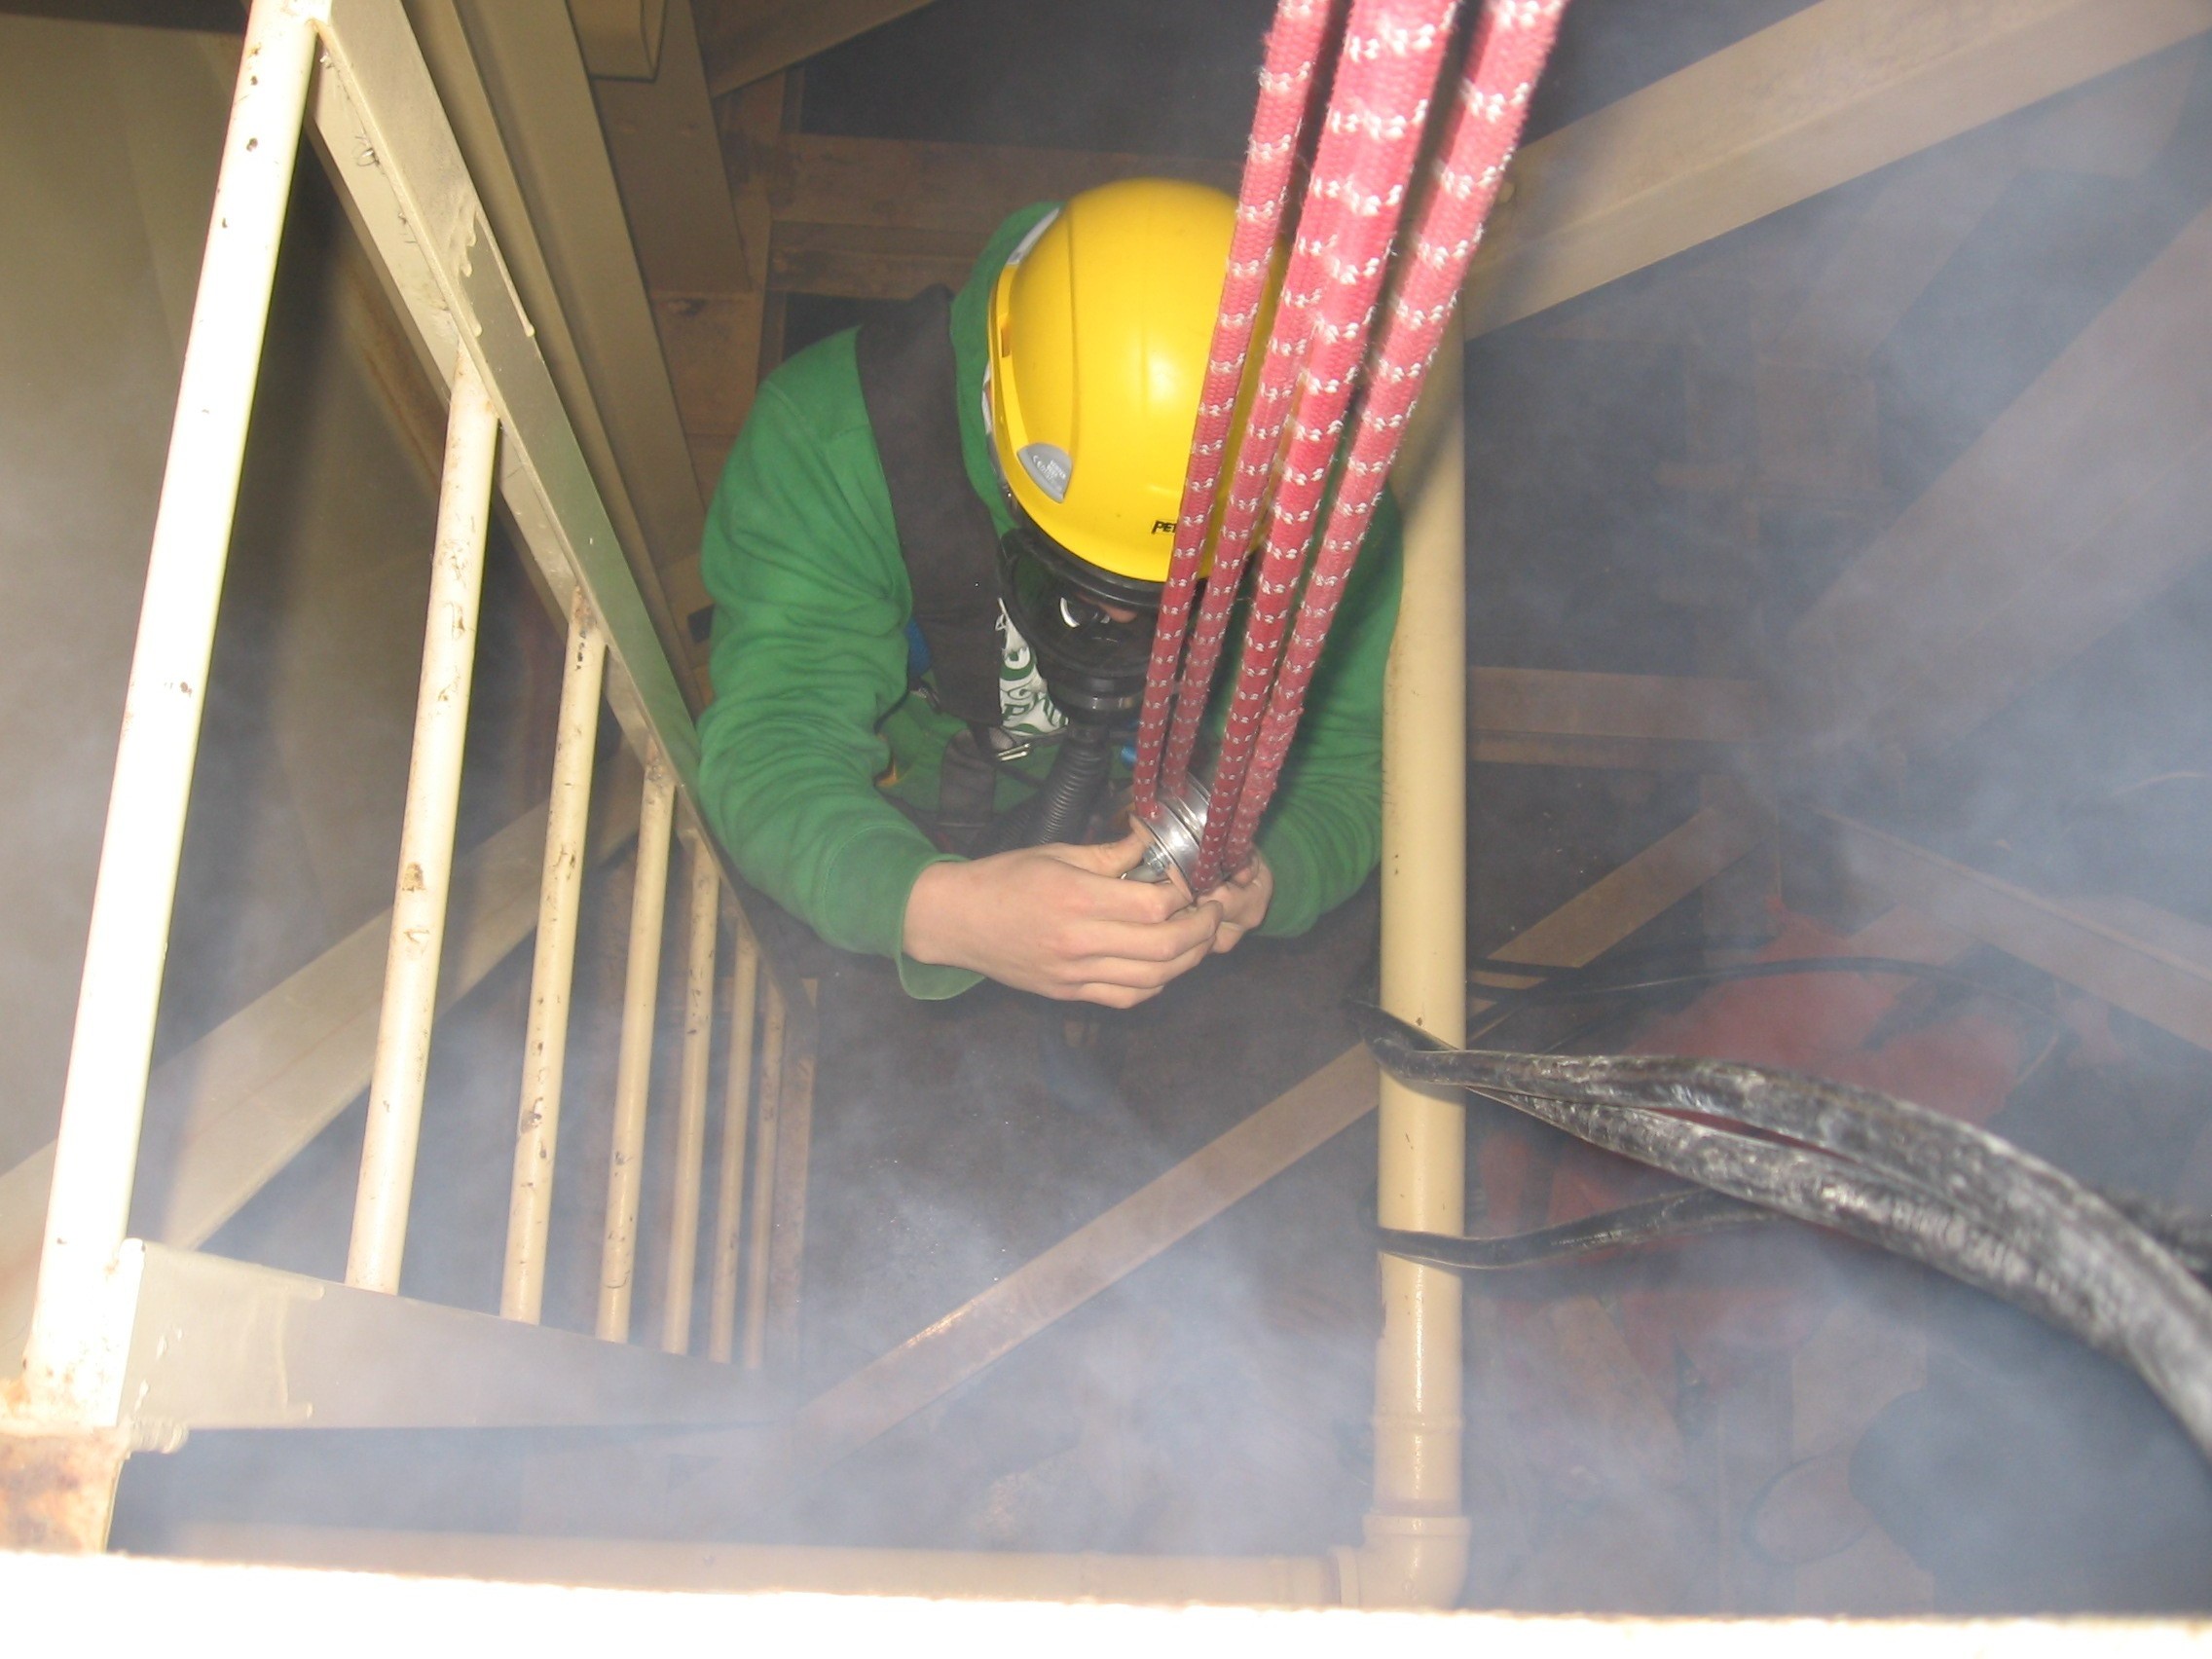 The Top Skills You’ll Gain from a Confined Space Rescue Safety Training Course